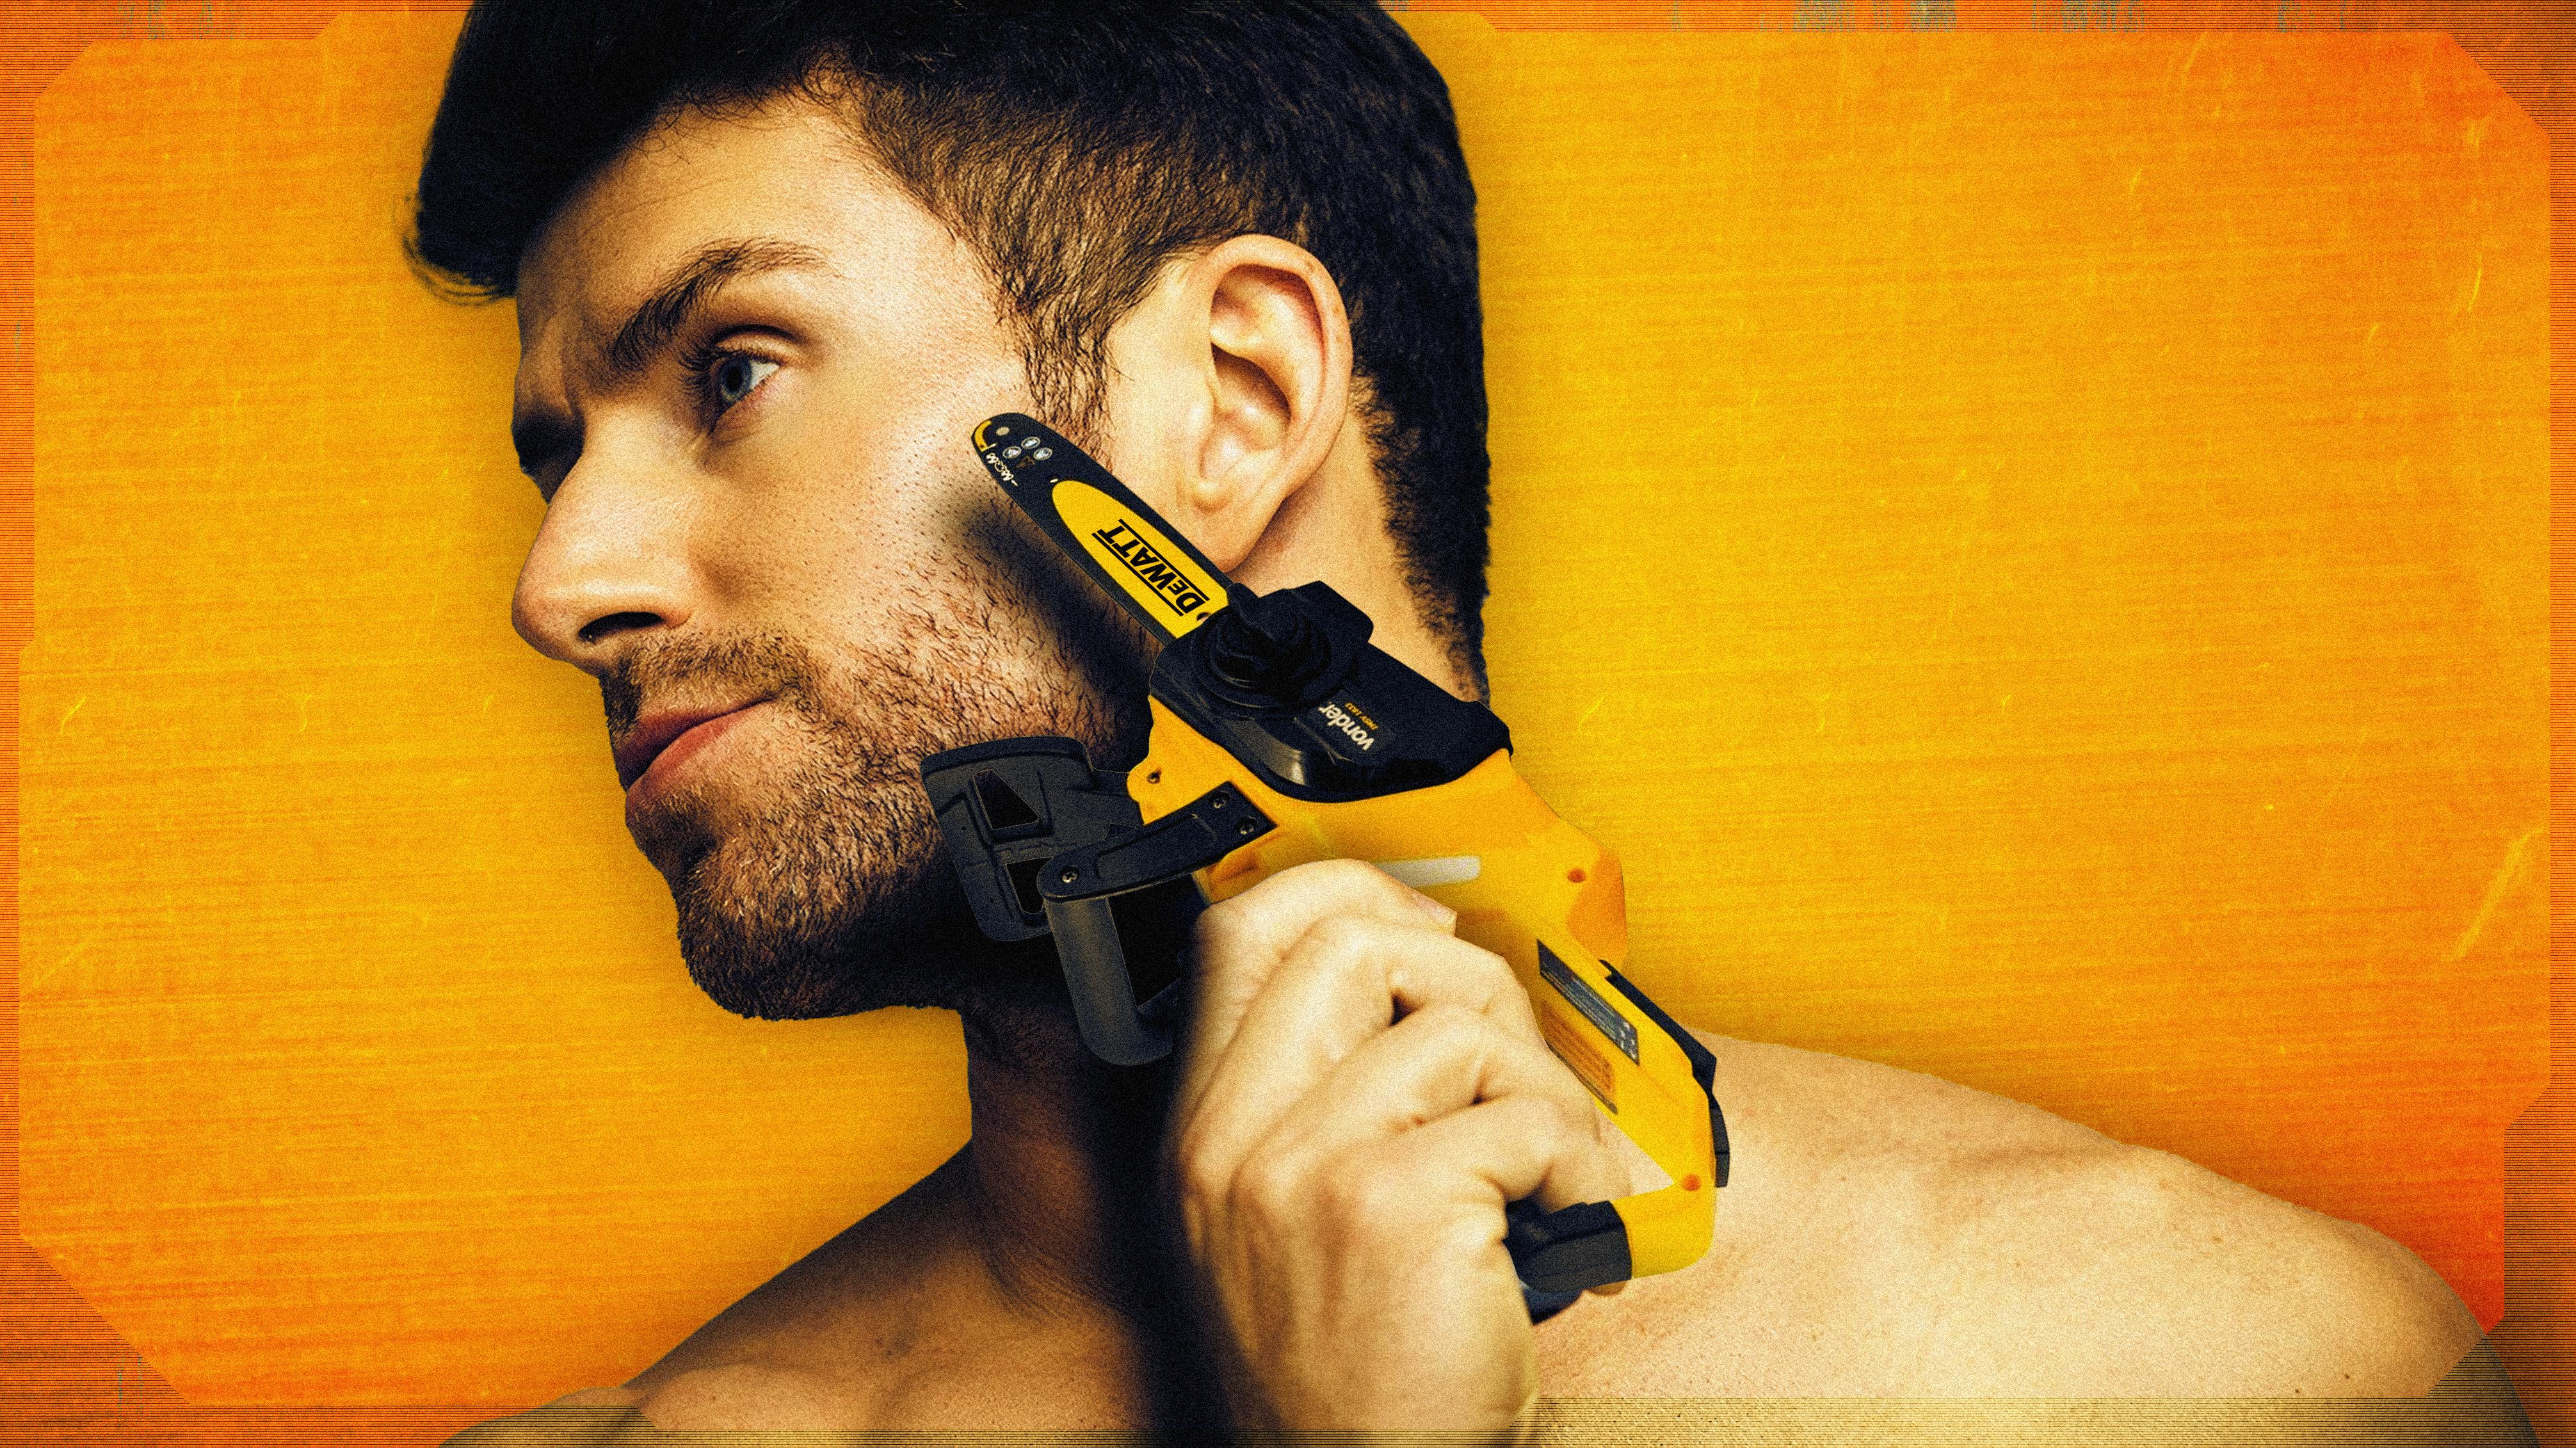 Photoshopped Poster Advertisements Yellow Yellow Background Technology Tools Chainsaws Artwork Digit 4024x2262